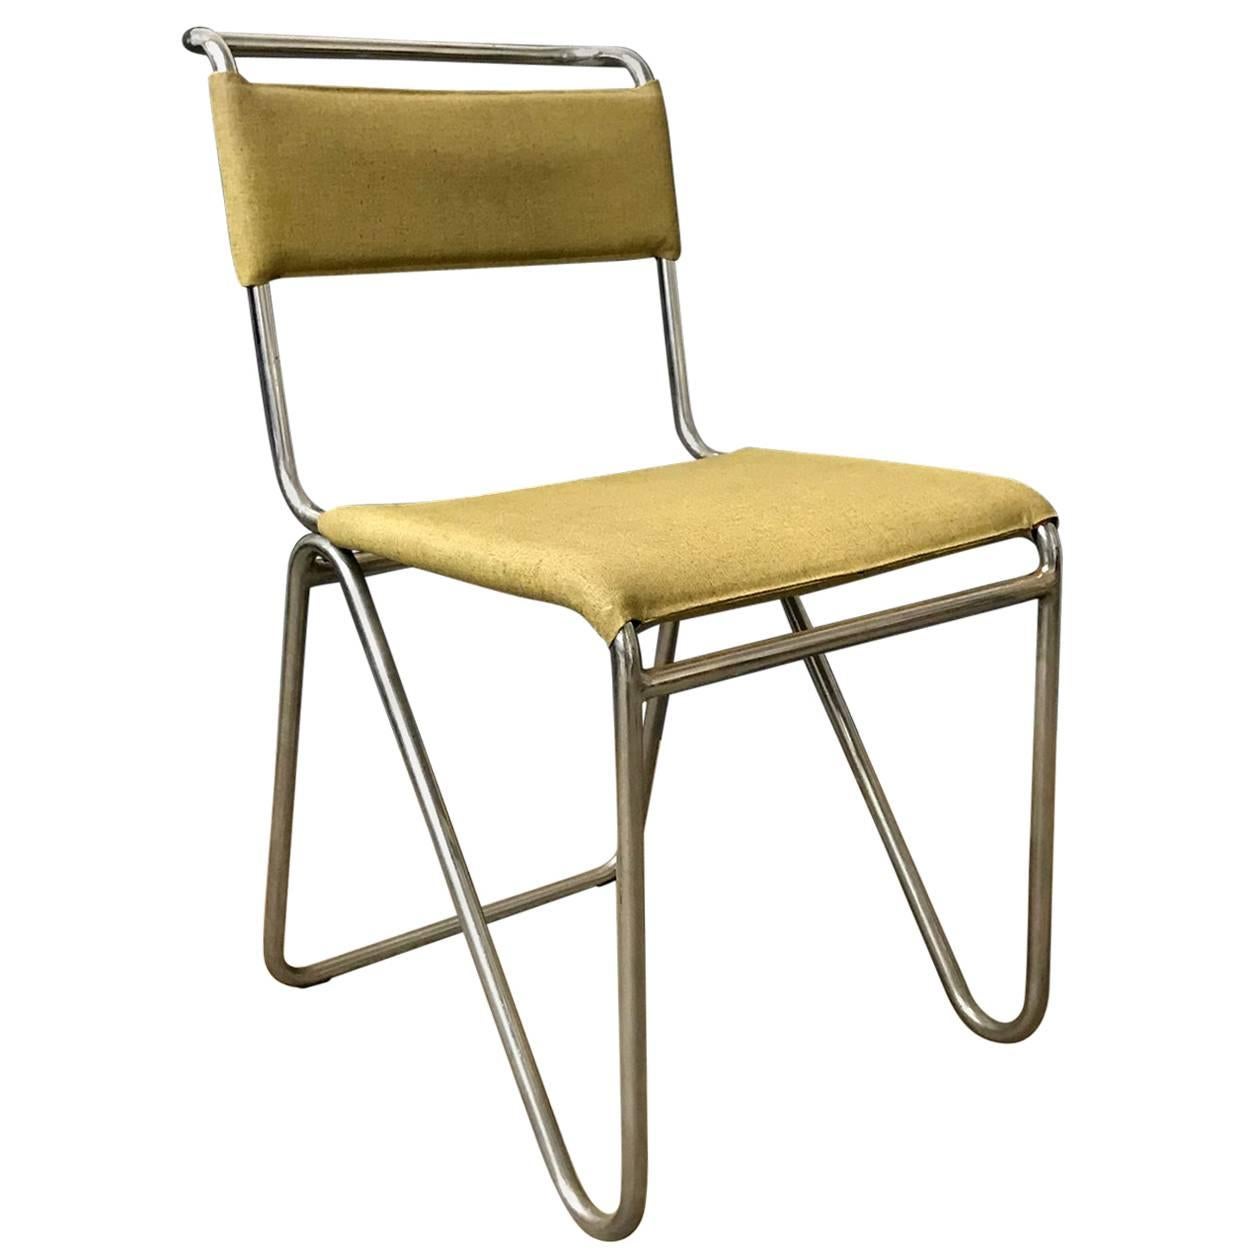 1927, W.H. Gispen for Gispen, Diagonal Chair 102 in Original Yellow Faux Leather For Sale